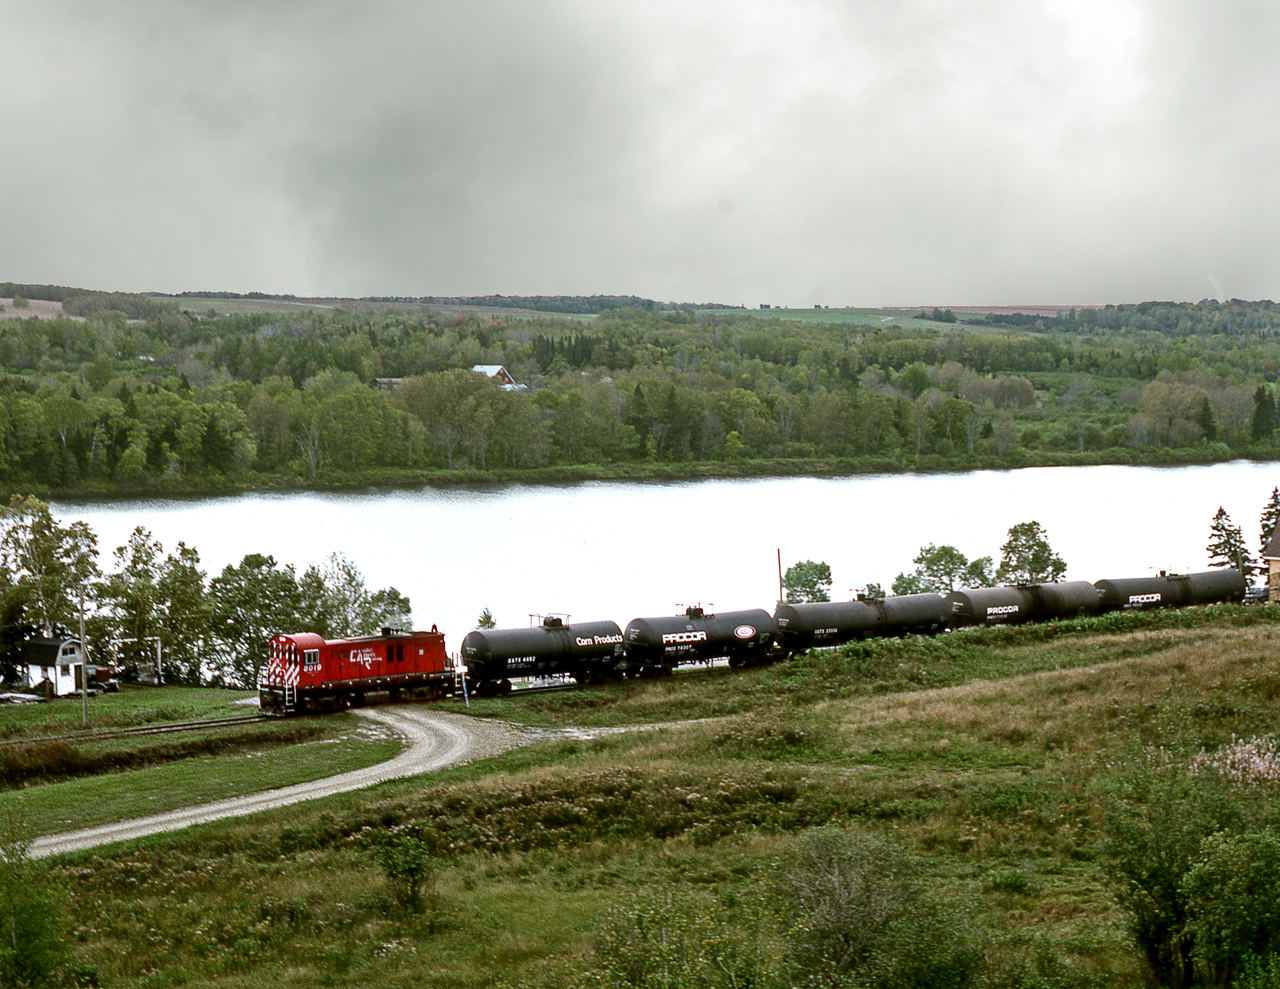 The last remaining segment of CPR's Maritime operations, the McCain spur from St.Leonard to McCain plant at Grand Falls NB, sees RS23 8019 heading east along the St.John River to the McCain plant. The line was sold to CN later that year and now abandoned